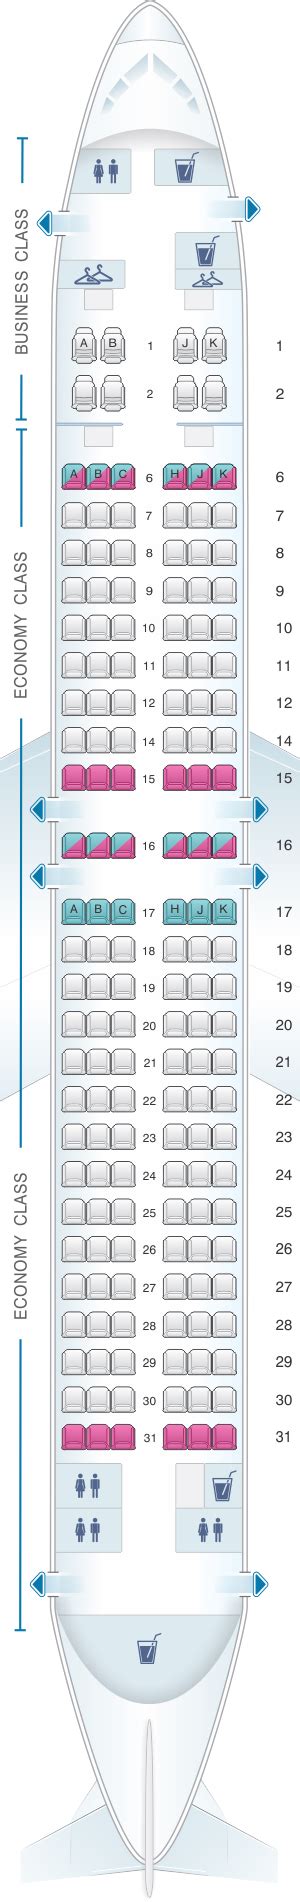 China Airlines Seat Selection Map Cabinets Matttroy